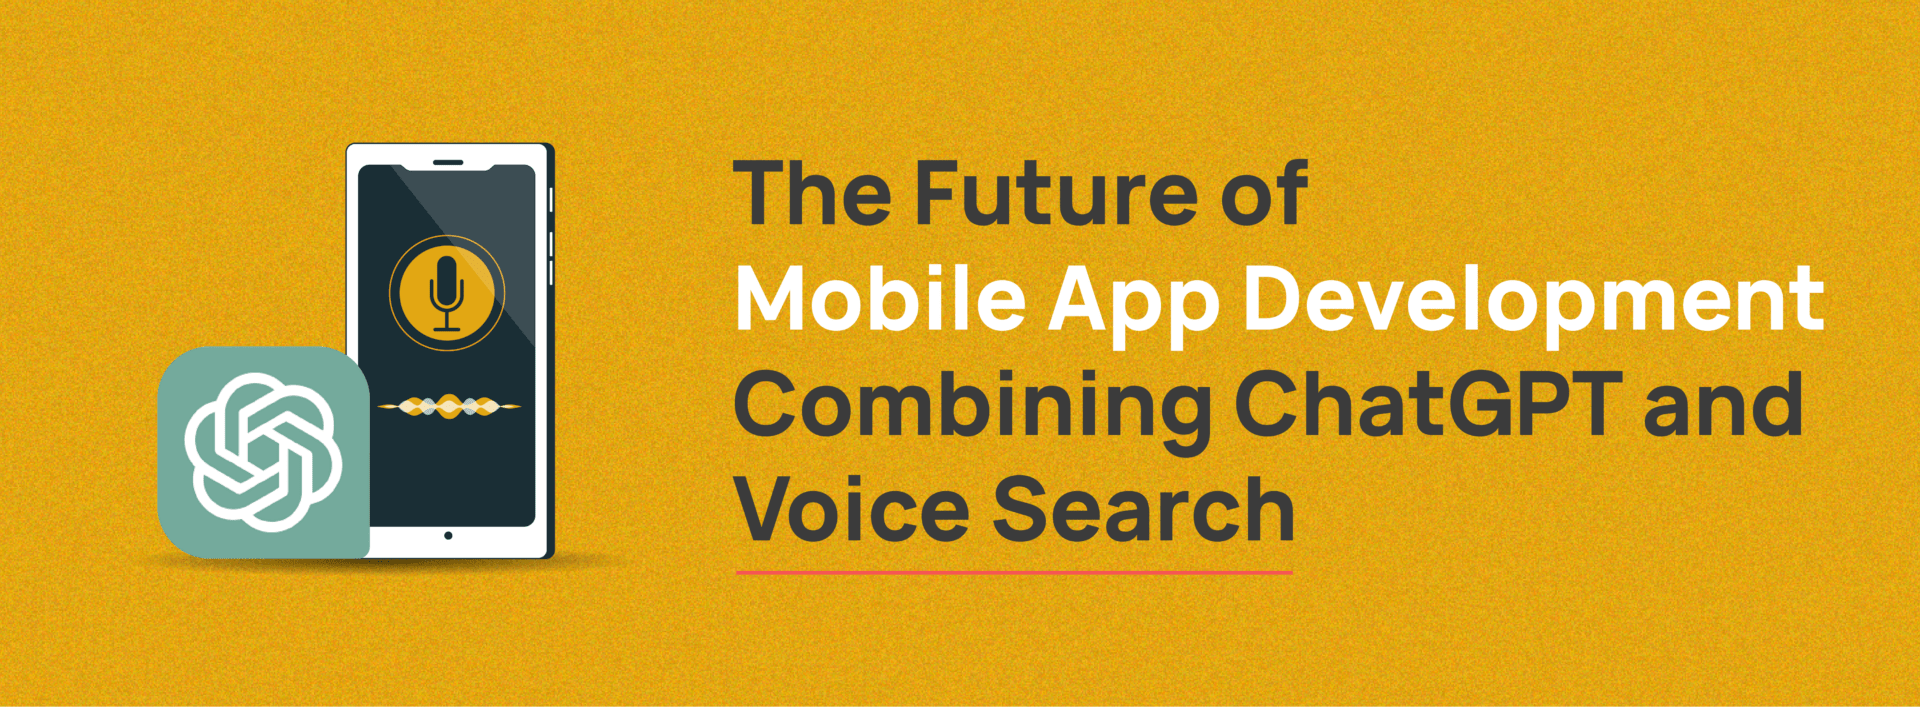 mobile-app-development-with chatgpt-and-voicesearch